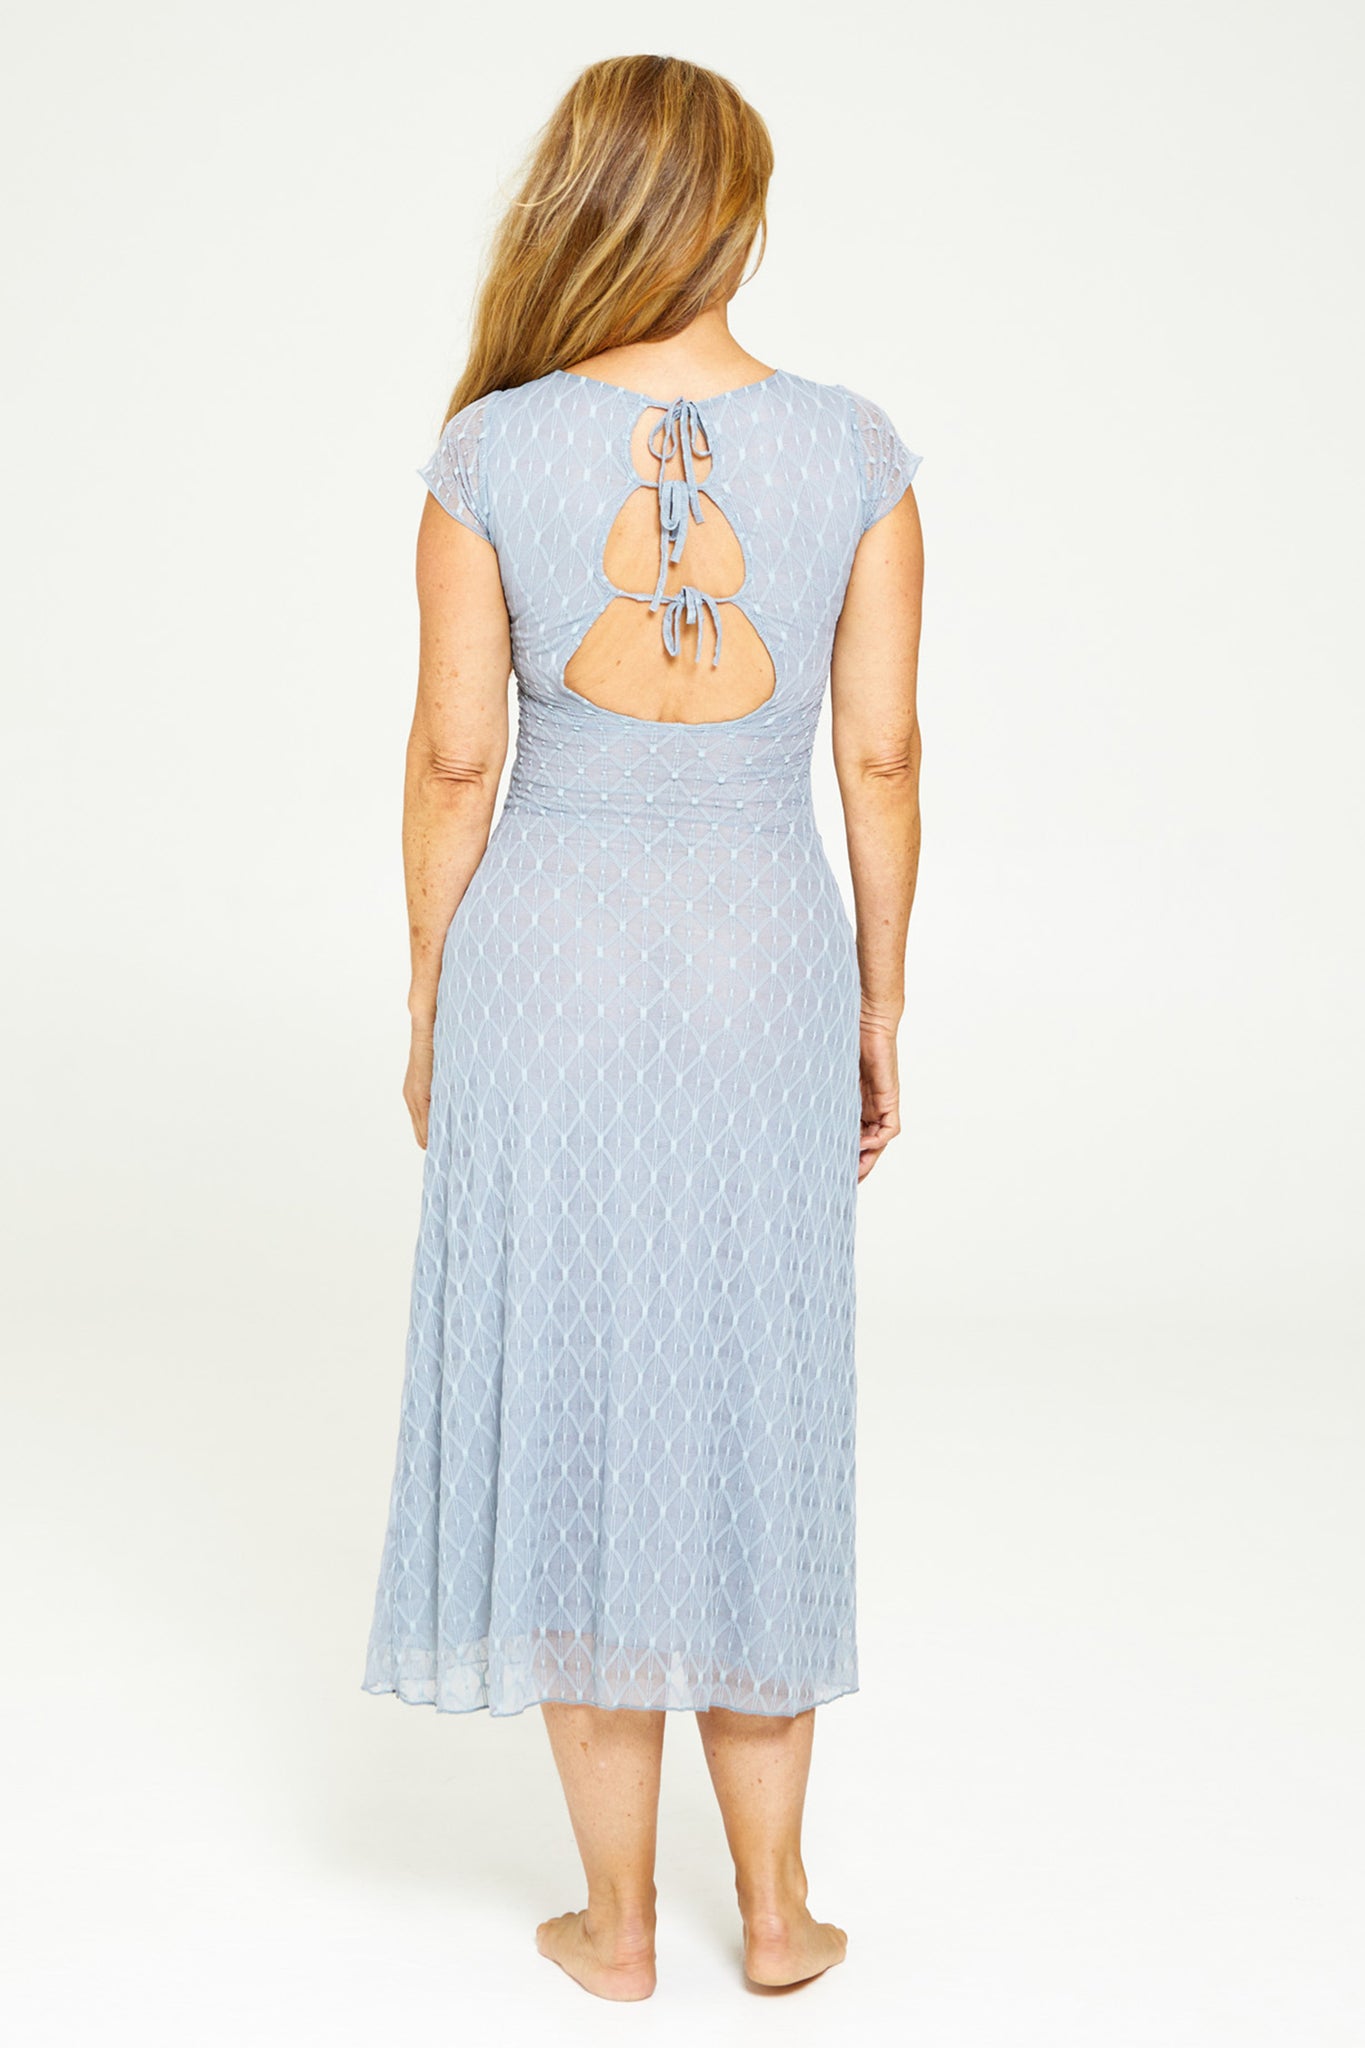 Find Me Now Geo Lace Midi Dress - Cool Blue